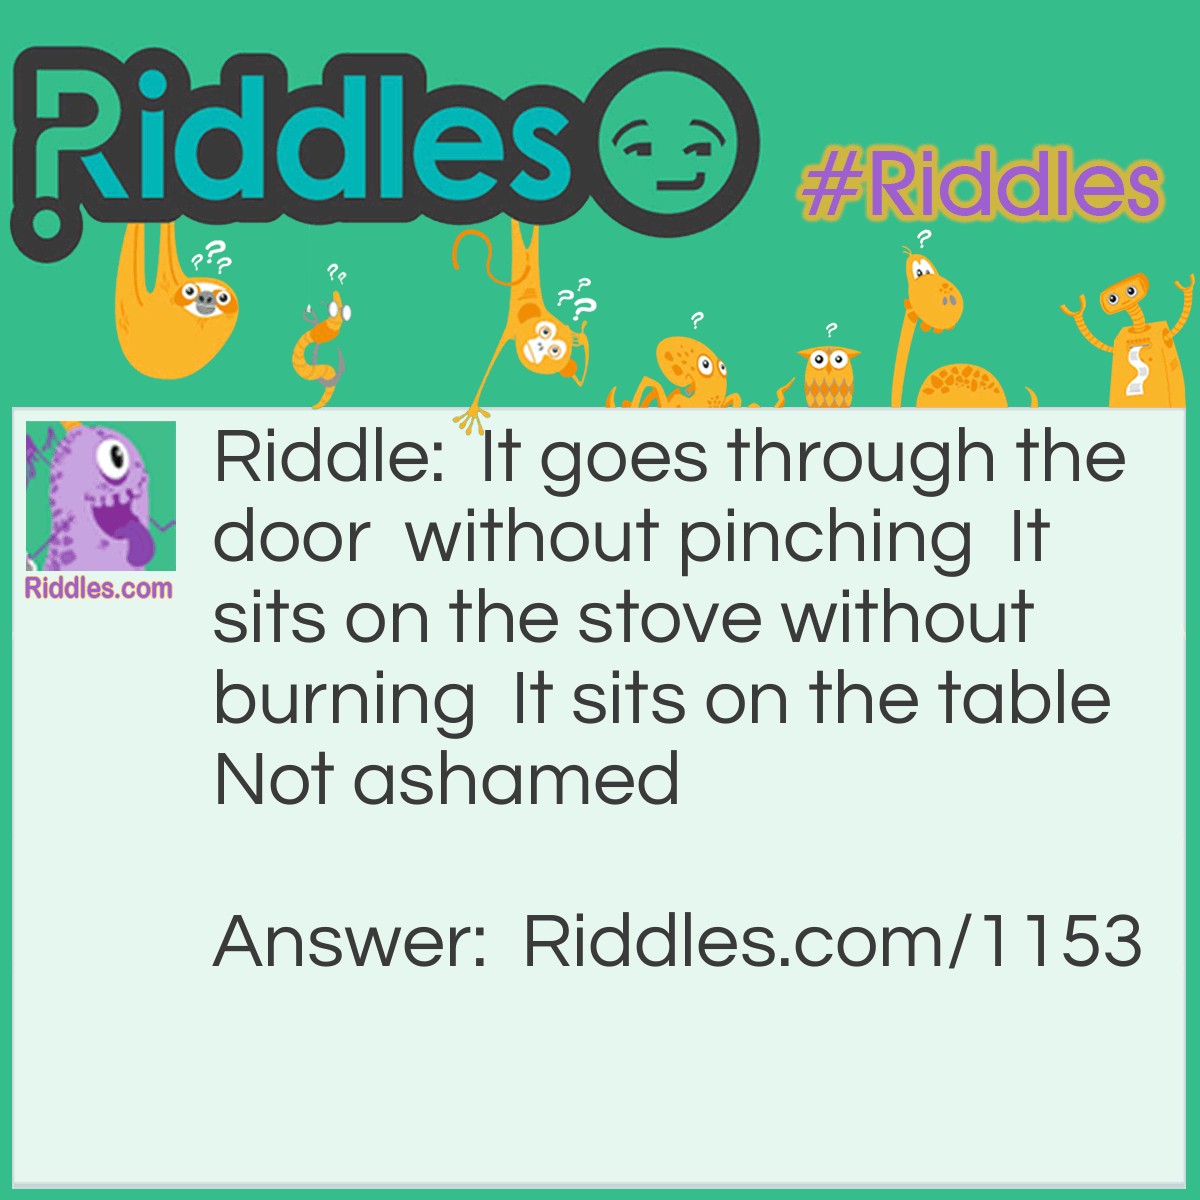 Riddle: It goes through the door without pinching. It sits on the stove without burning. It sits on the table Not ashamed. What is it? Answer: The Sun.